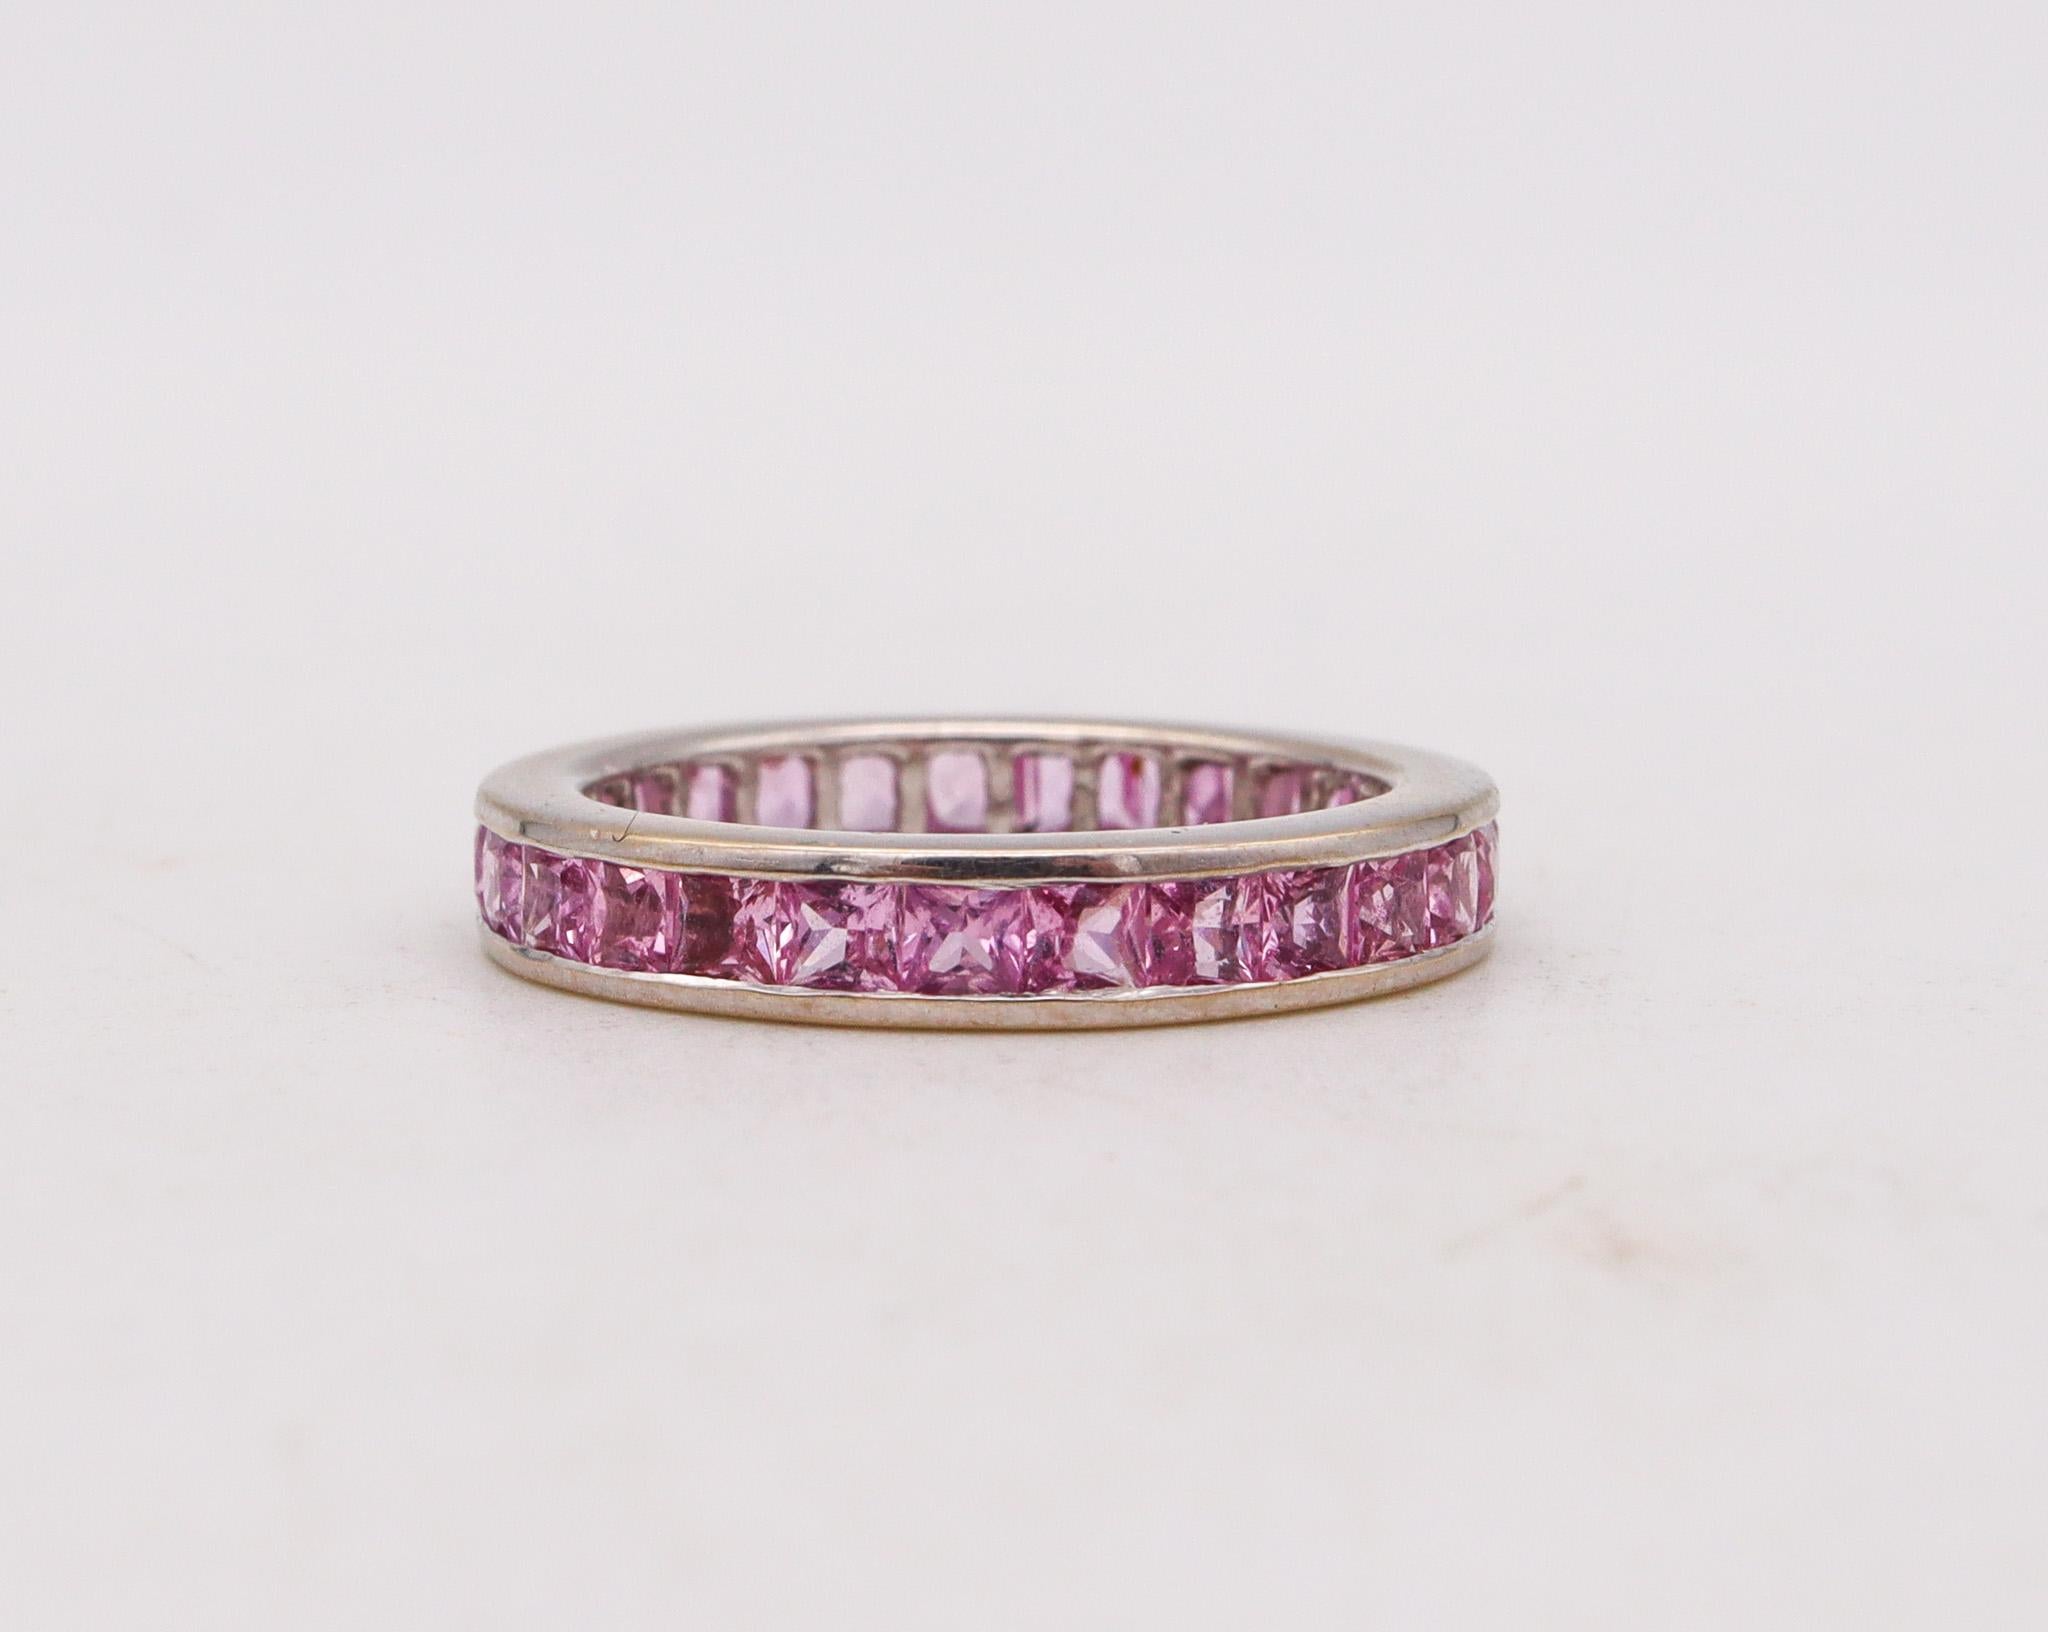 An eternity ring with Pink Sapphires.

A classic modern full eternity band carefully crafted in solid white gold of 18 karats, with high polished finish.

Pink Sapphires: Mounted in a channel setting, with 27 calibrated French squared steps cuts of